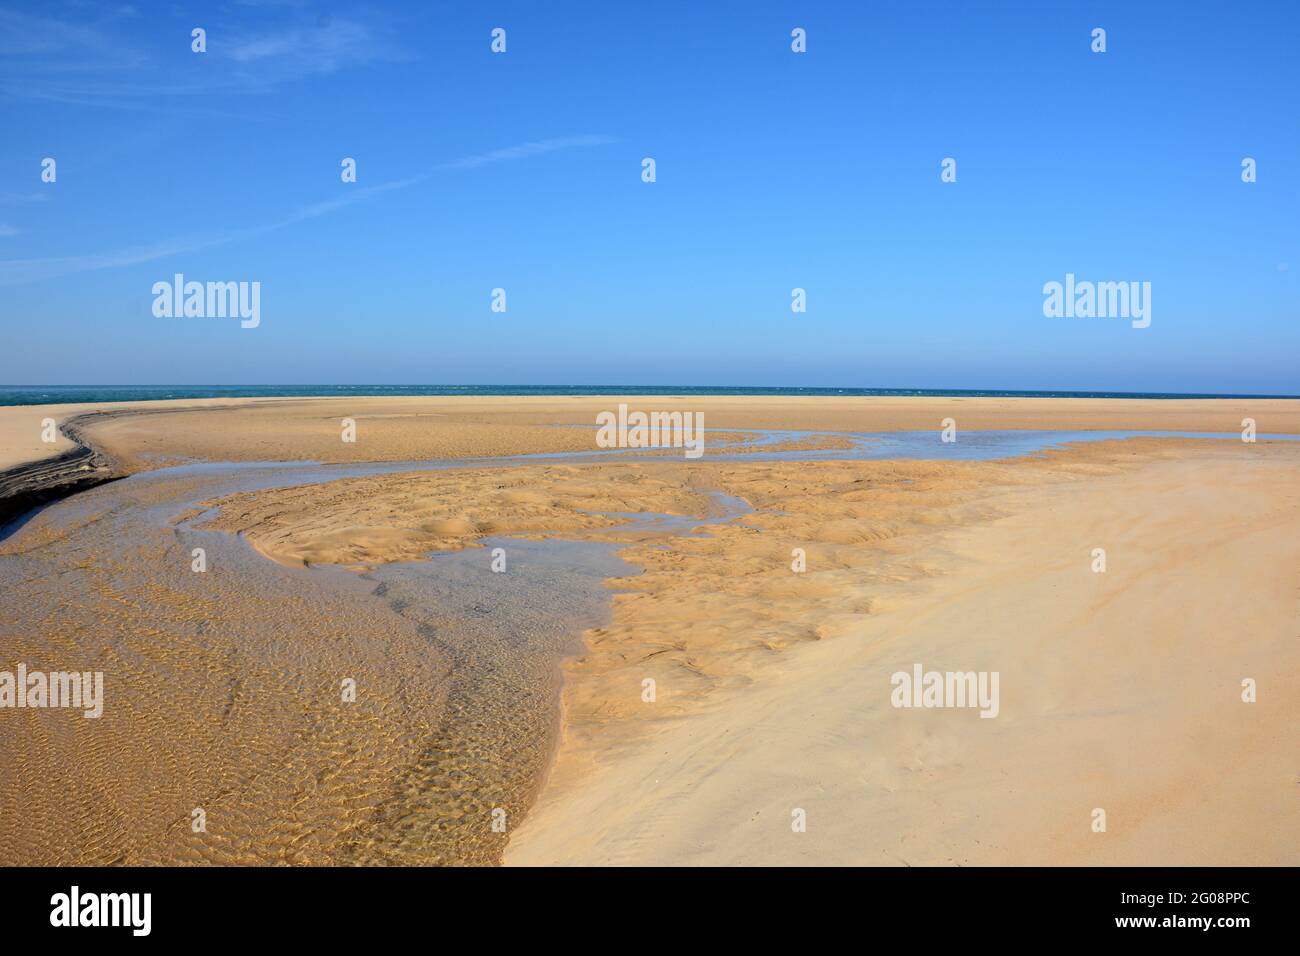 France, Aquitaine, cap Ferret, located between the Arcachon basin and the atlantic ocean it offers on the ocean side beautifu lbeaches at low tide. Stock Photo